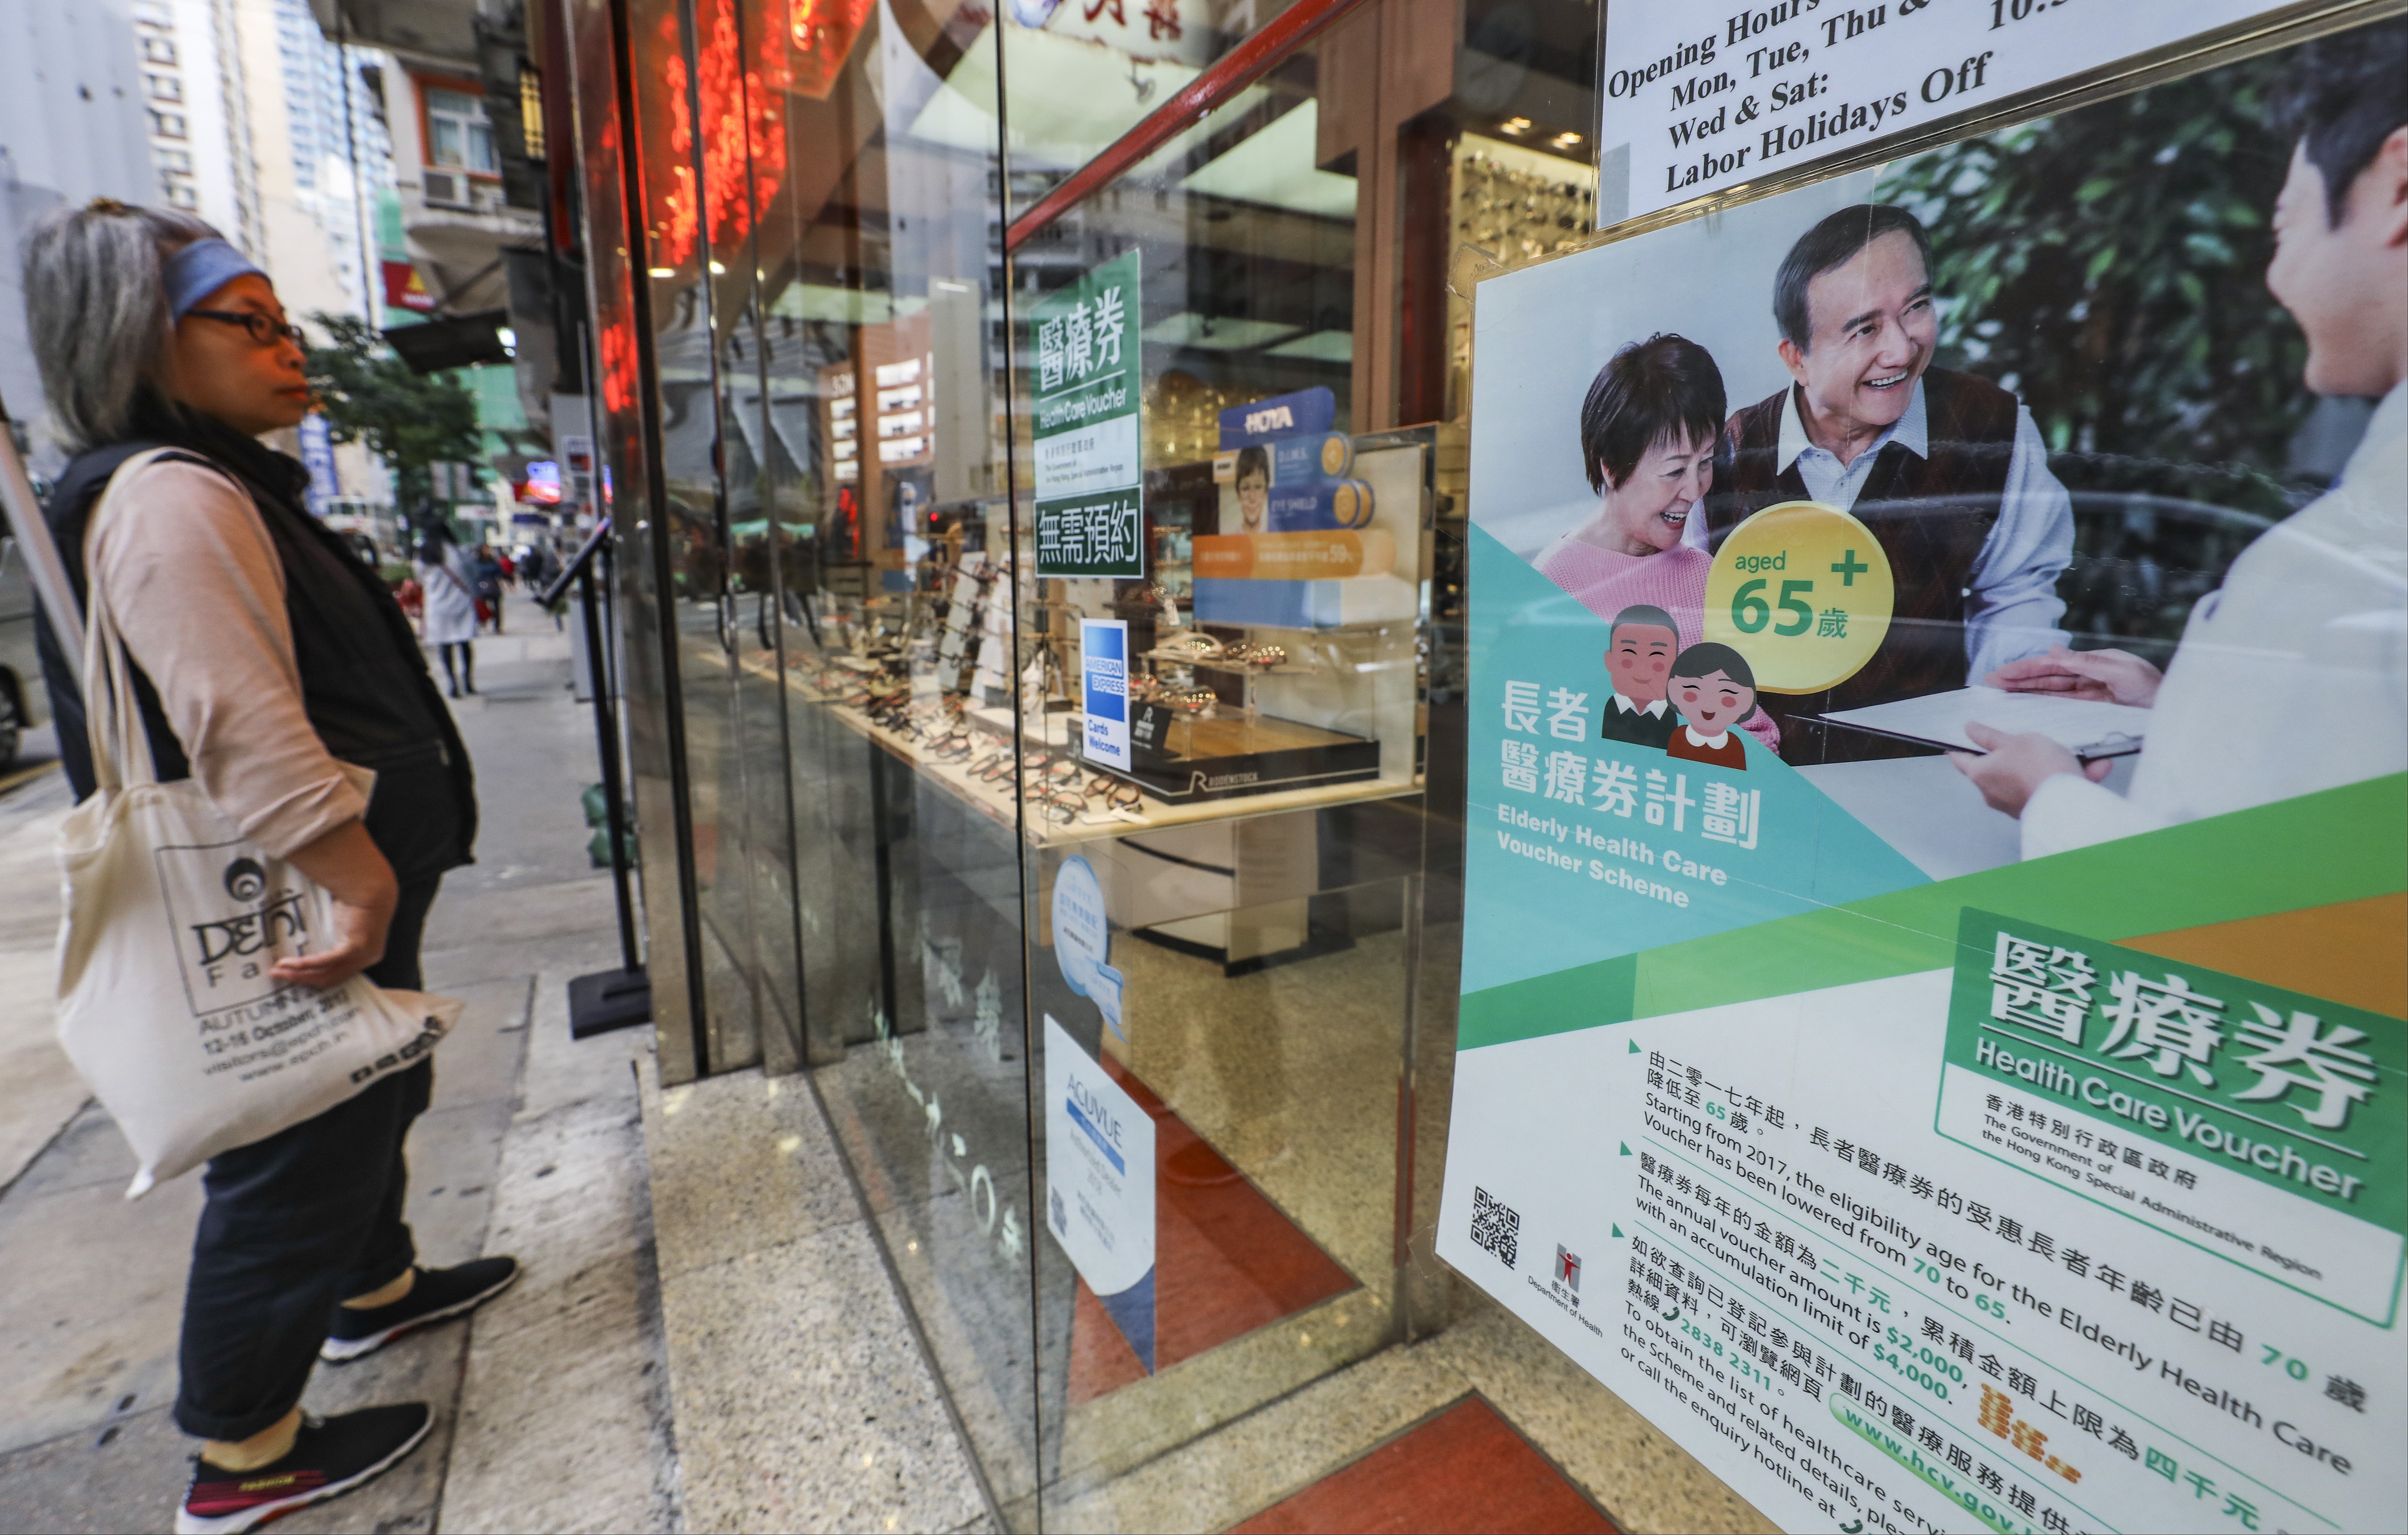 Elderly residents should have the freedom to spend what they want on glasses, a trade body says. Photo: Sam Tsang